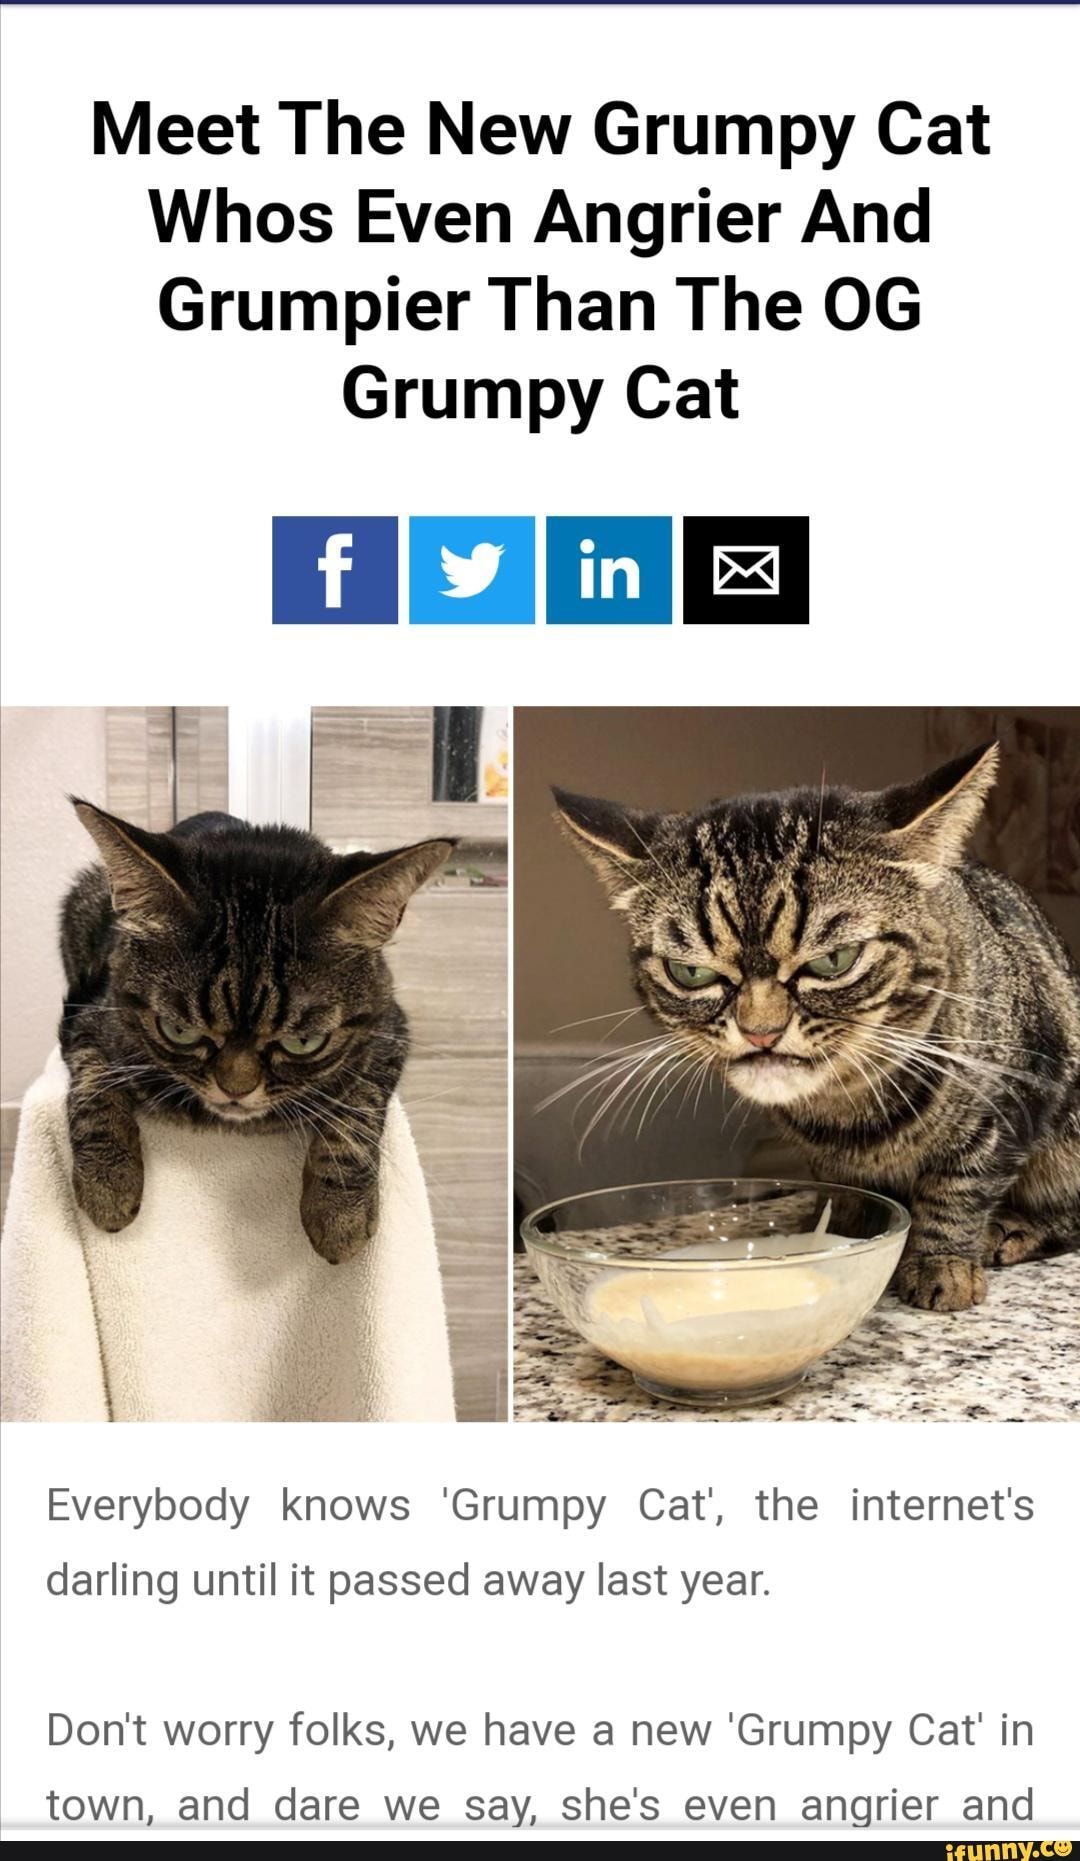 Meet The New Grumpy Cat Whos Even Angrier And Grumpier